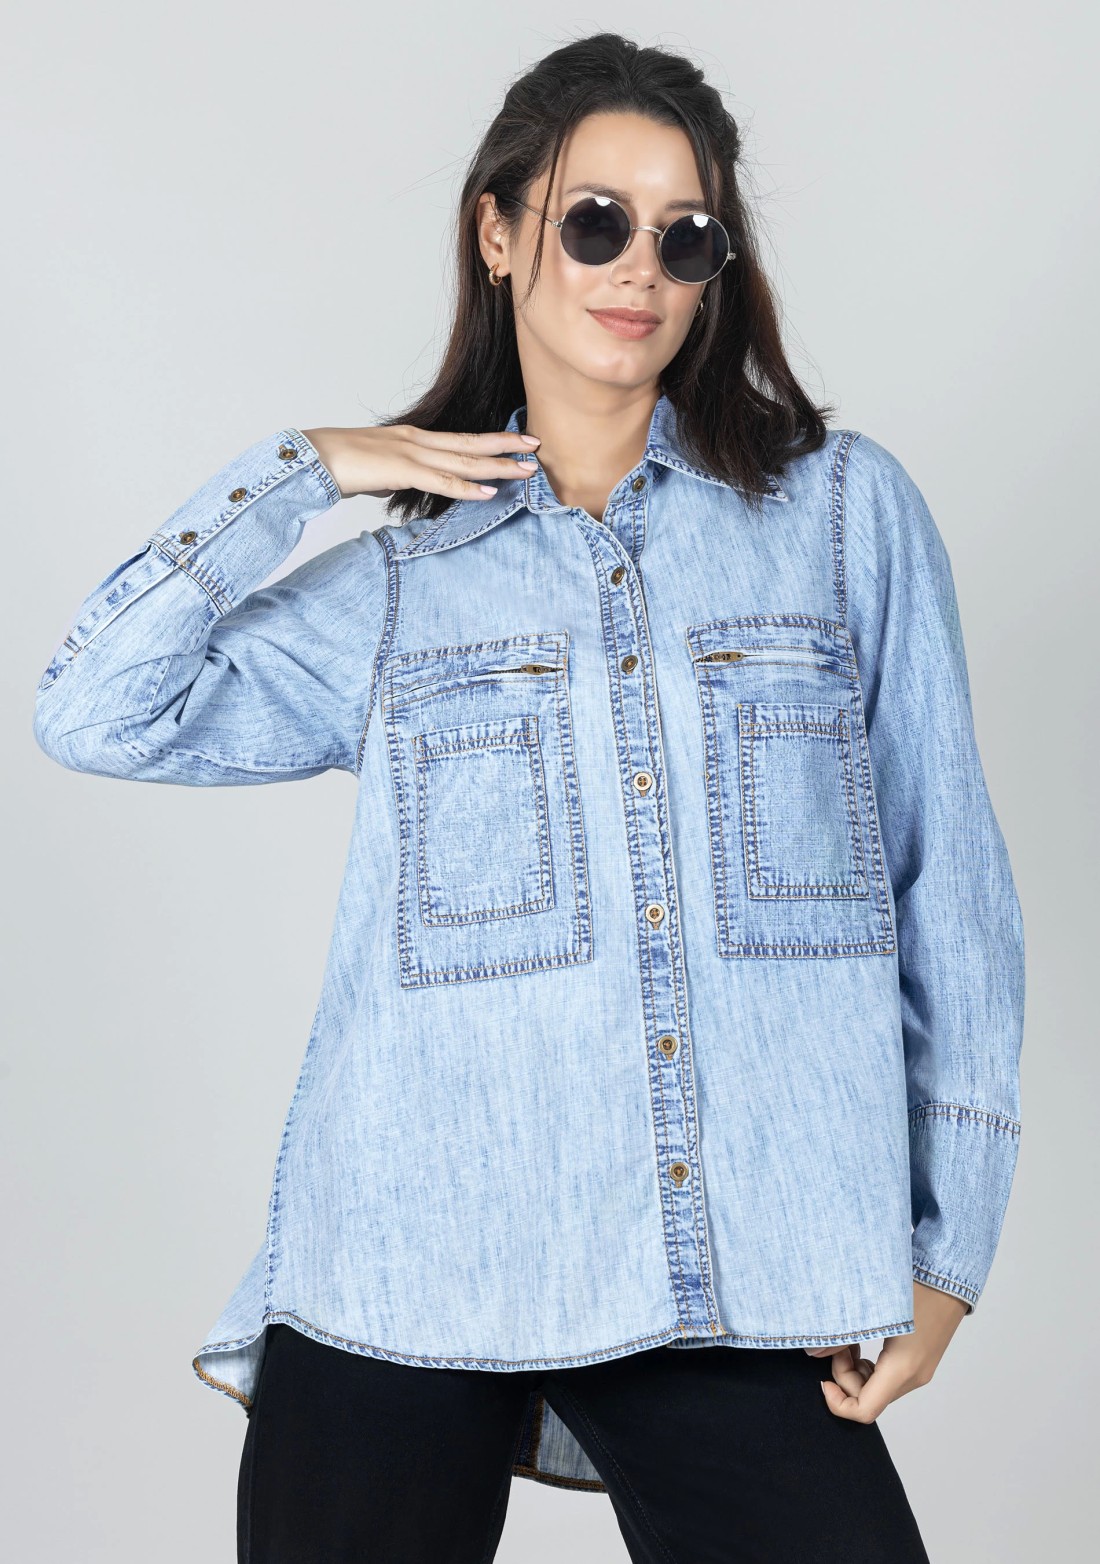 Girls Jeans Top Designs/Jeans Top Collection For Girls 2022/Girls Jeans Top  Ideas/Best Jeans Tops 22 | Jeans top design, Quick outfits, Girls jeans top